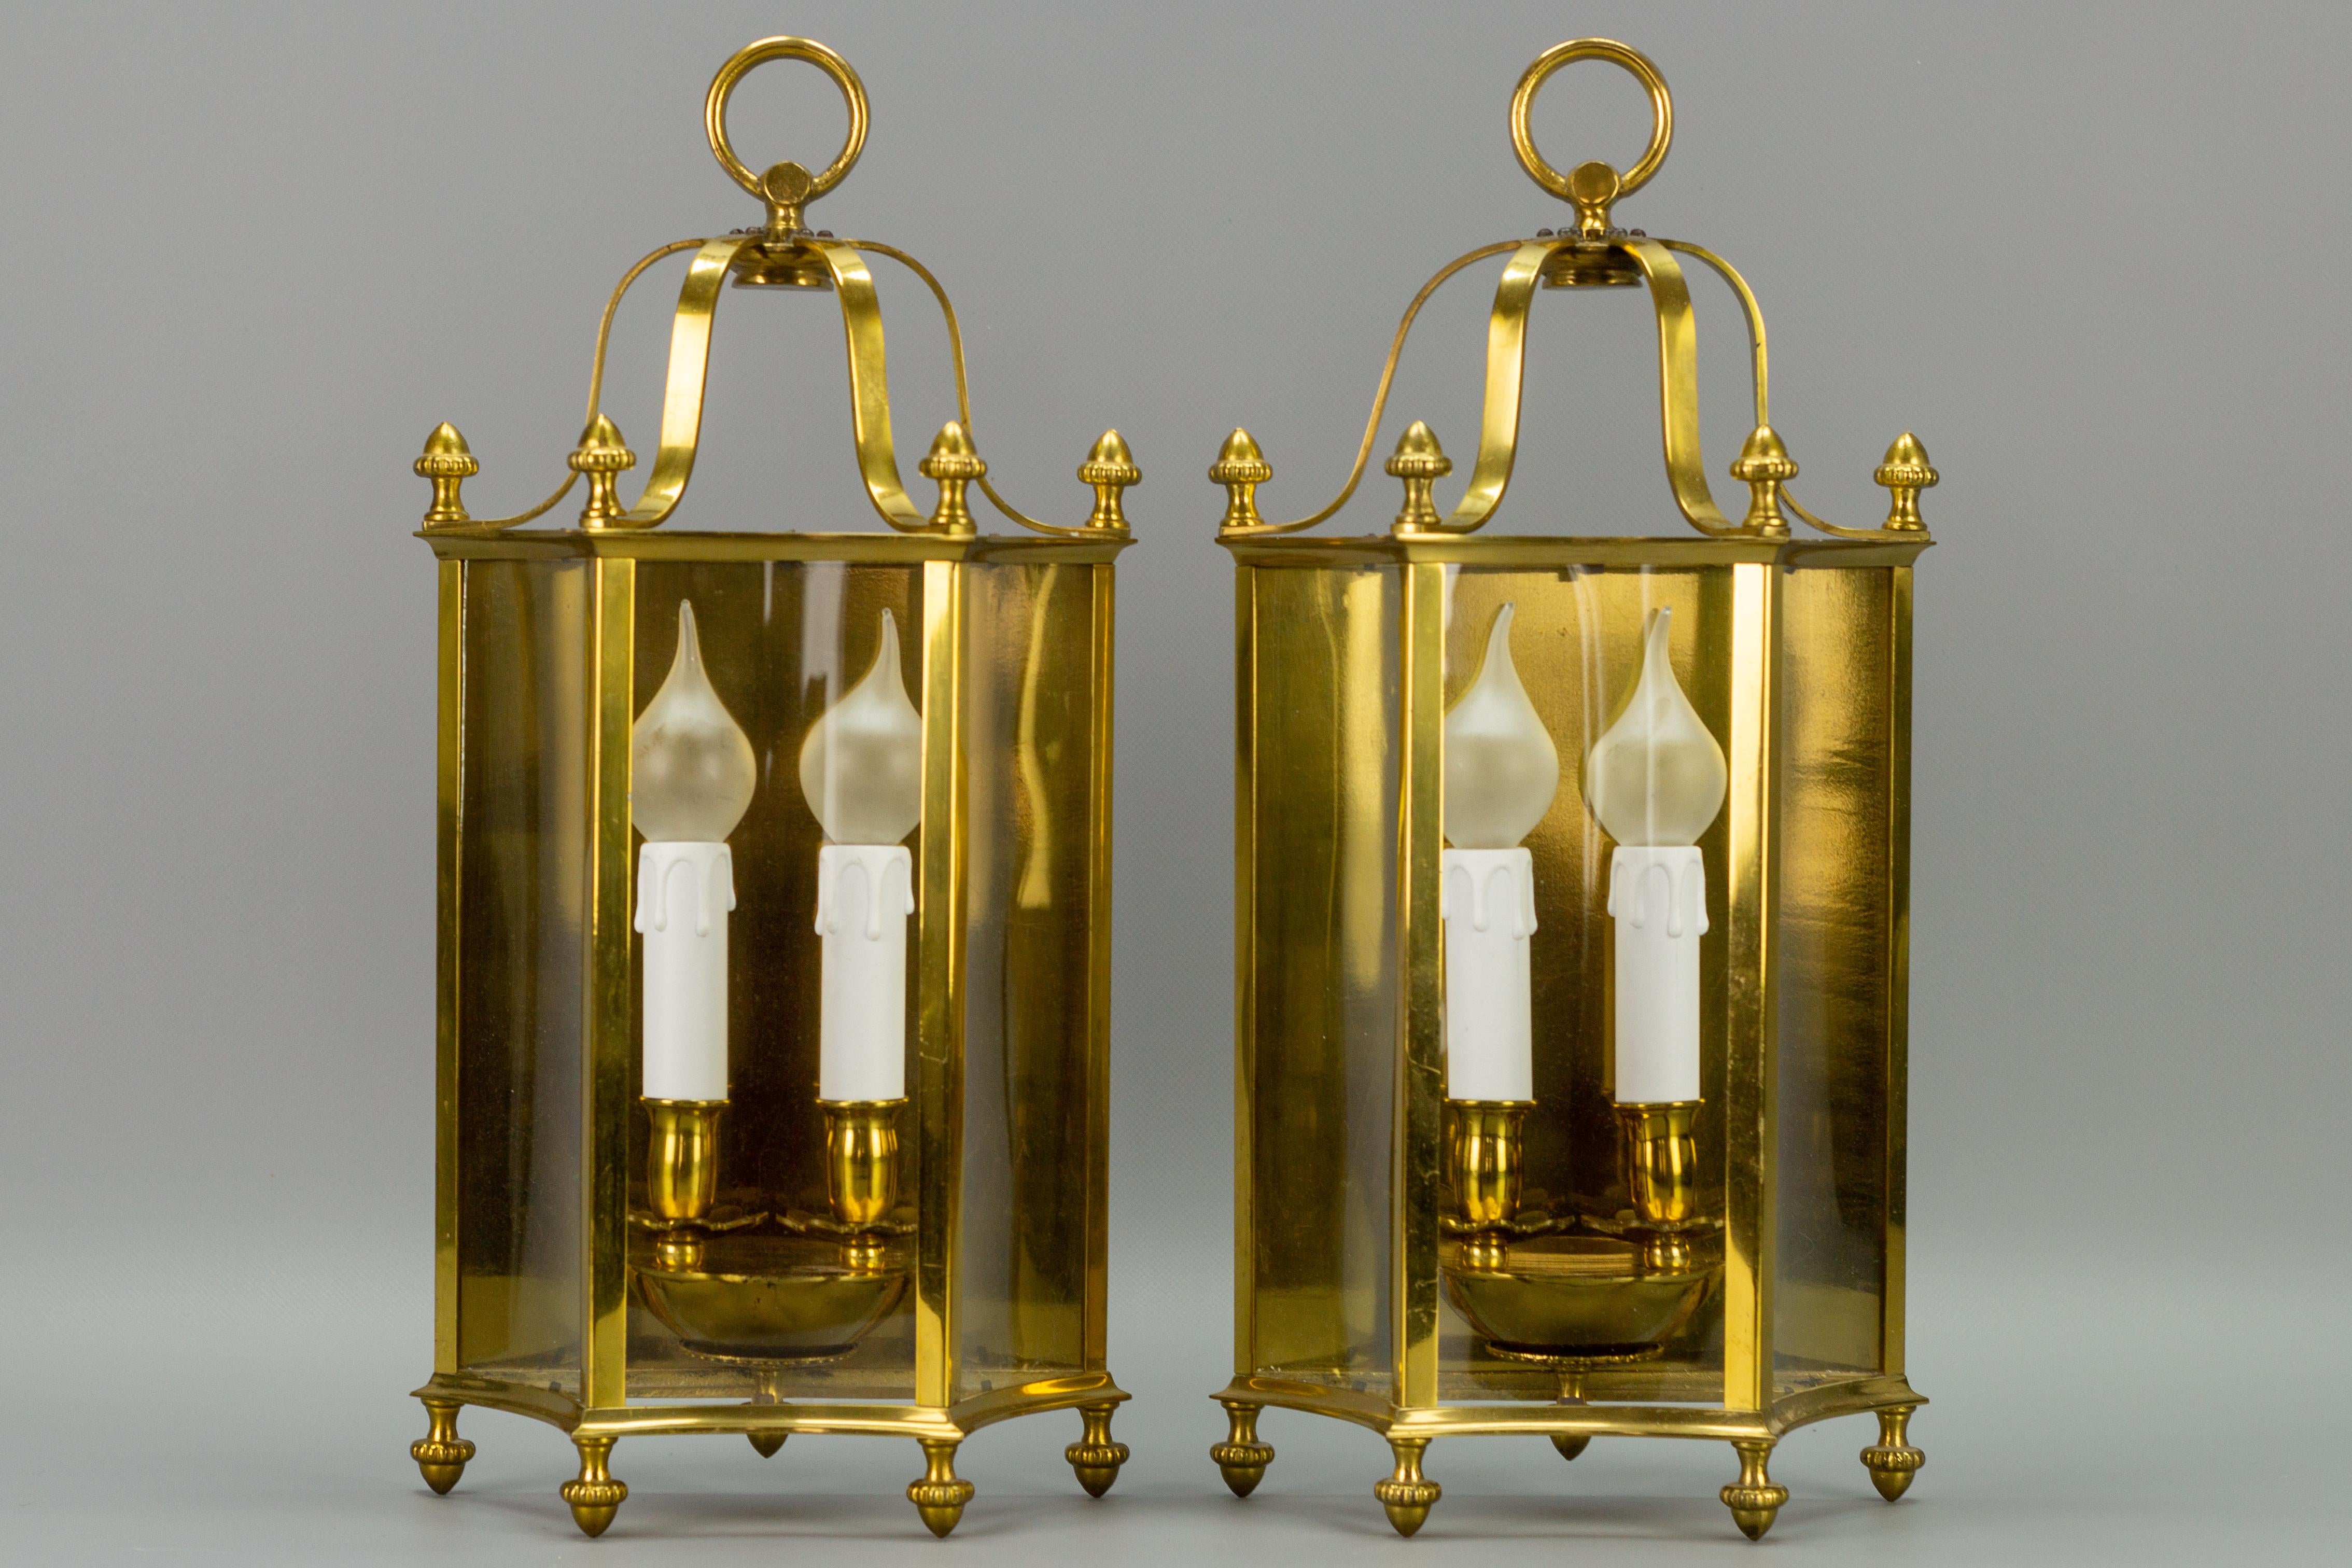 An adorable pair of French Neoclassical-style wall lanterns. These elegant wall lamps feature a polished brass frame and three curved clear glass panels.
Each wall light has two sockets for the E14-size light bulb.
Dimensions: height: 46 cm / 18.11